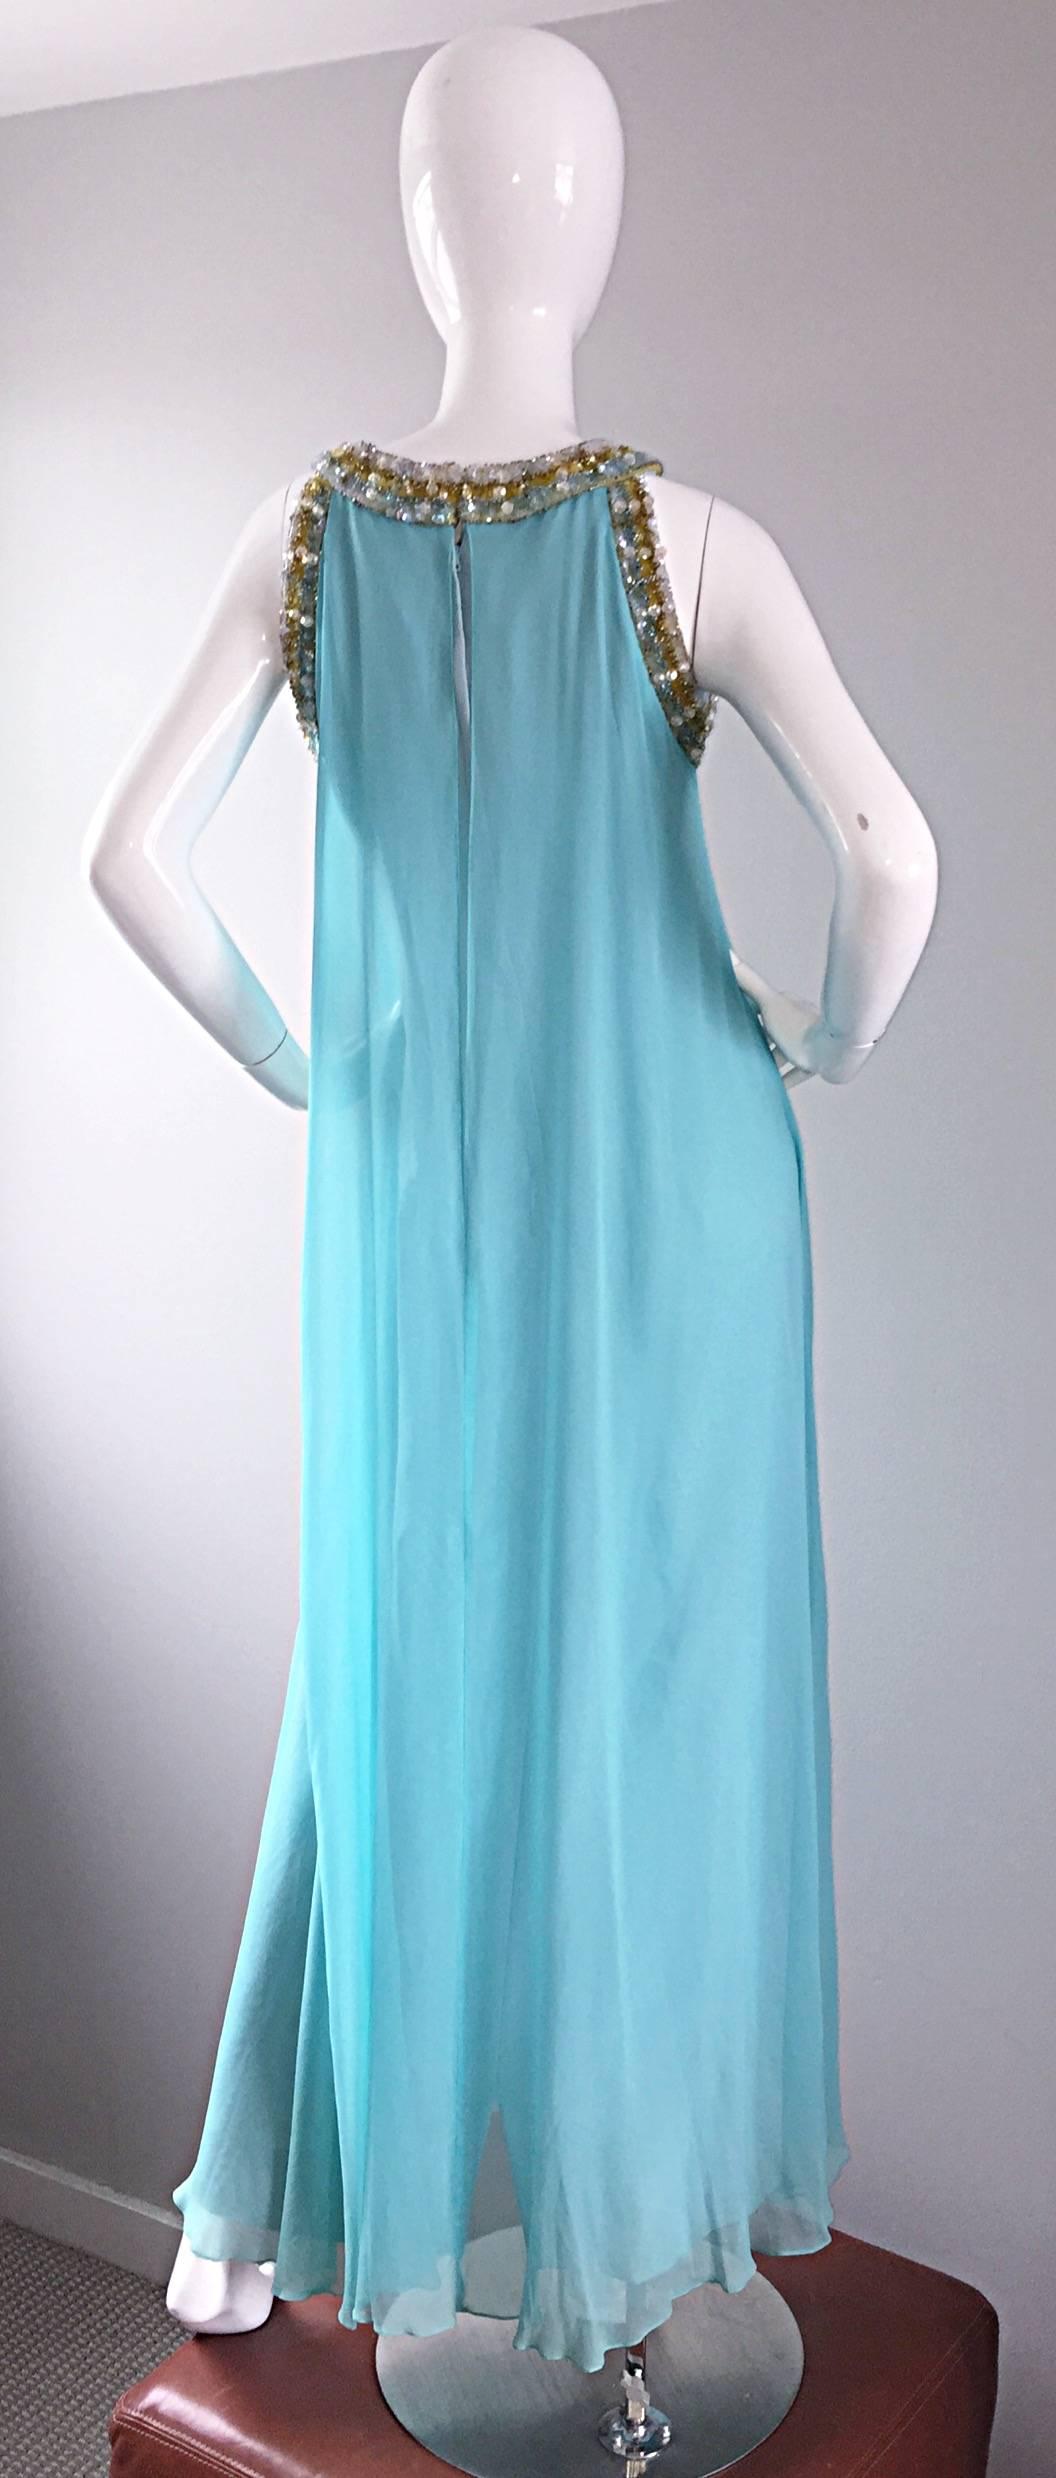 1960s Lord & Taylor Light Blue Aqua Chiffon Jeweled Rhinestone Vintage 60s Gown In Excellent Condition For Sale In San Diego, CA